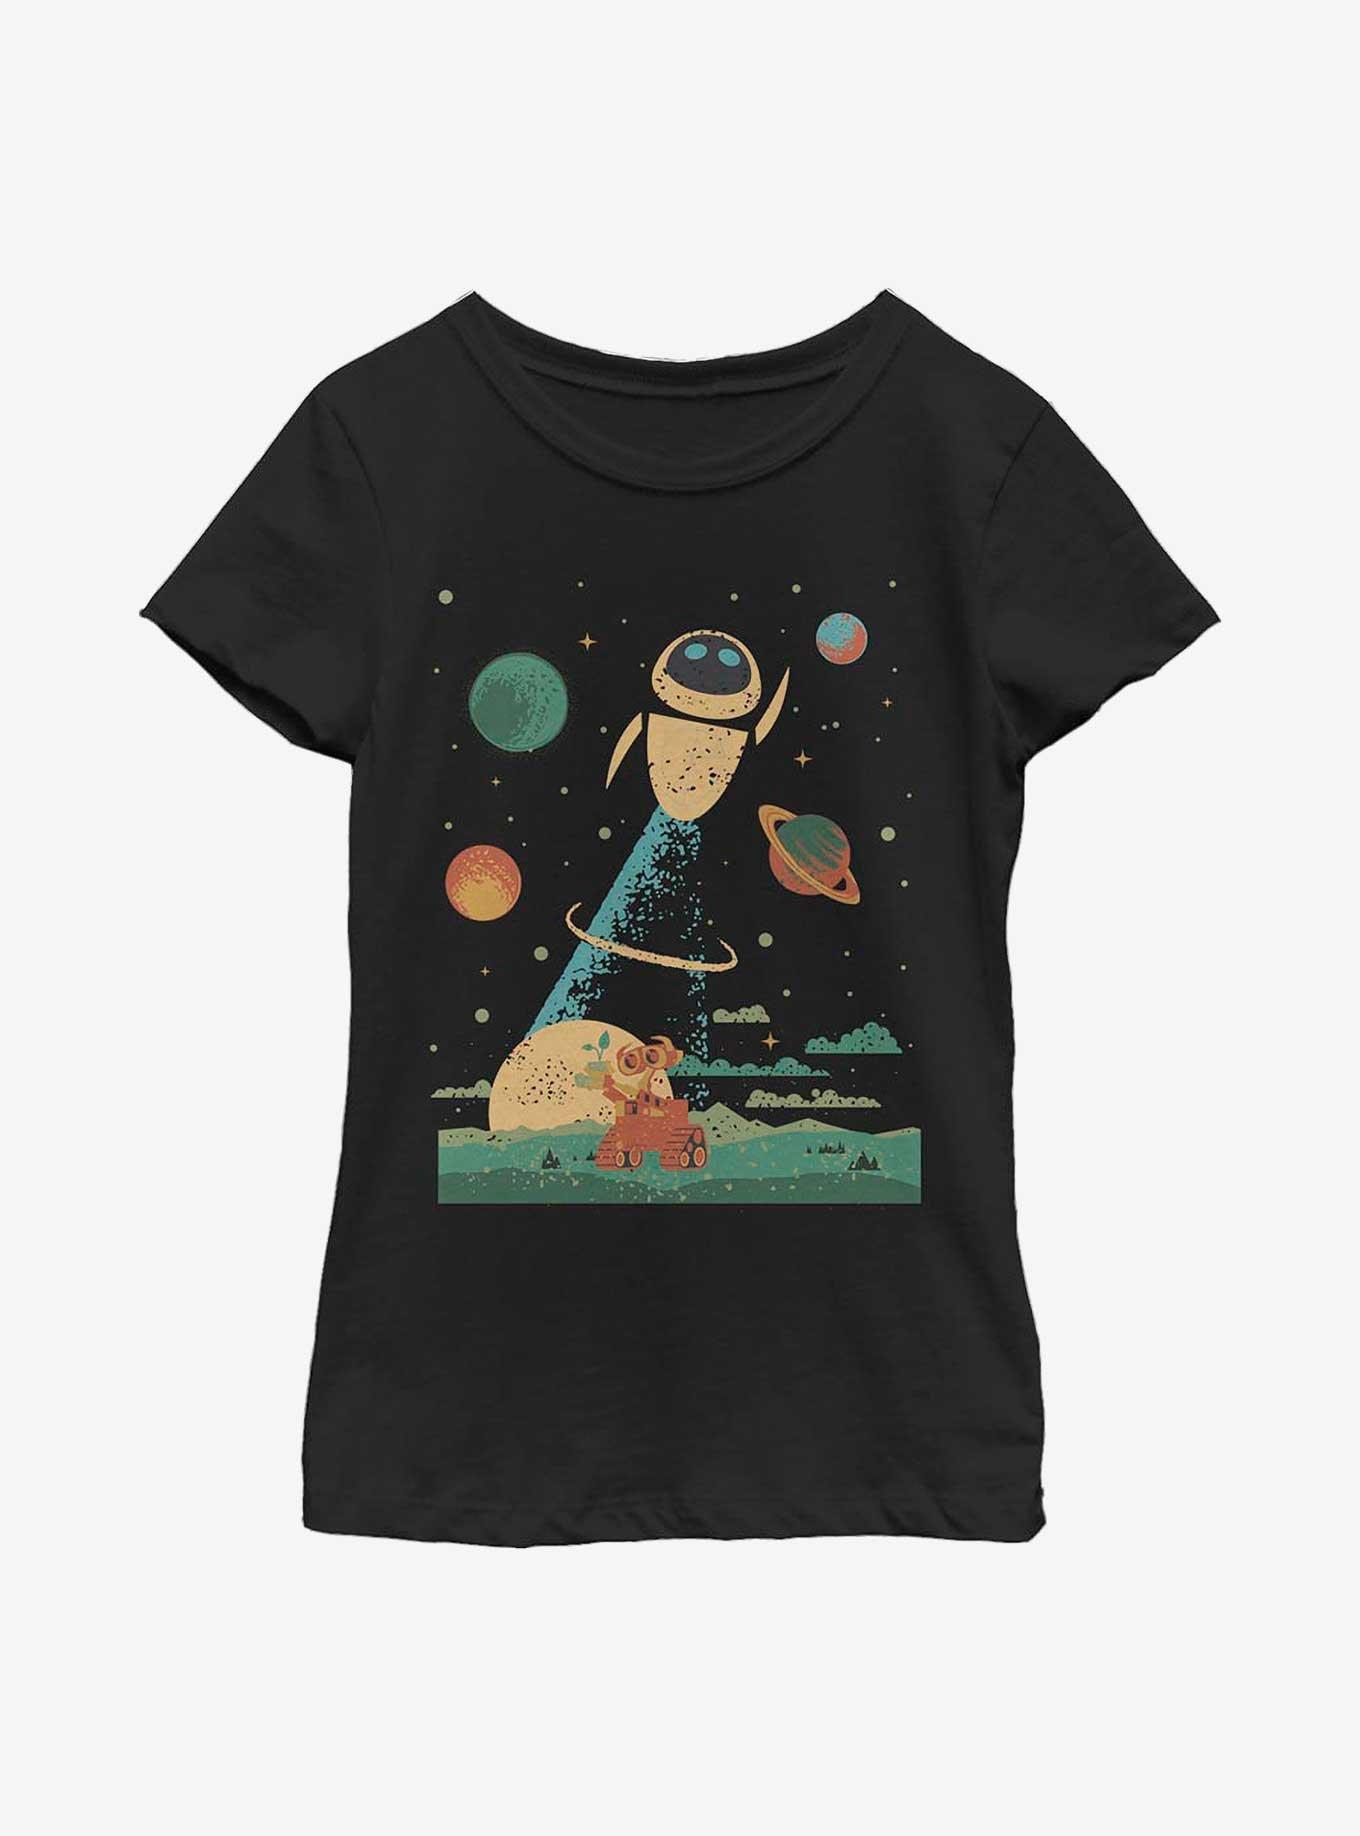 Disney Pixar Wall-E Eve and Wall-E Space Poster Youth Girls T-Shirt, BLACK, hi-res